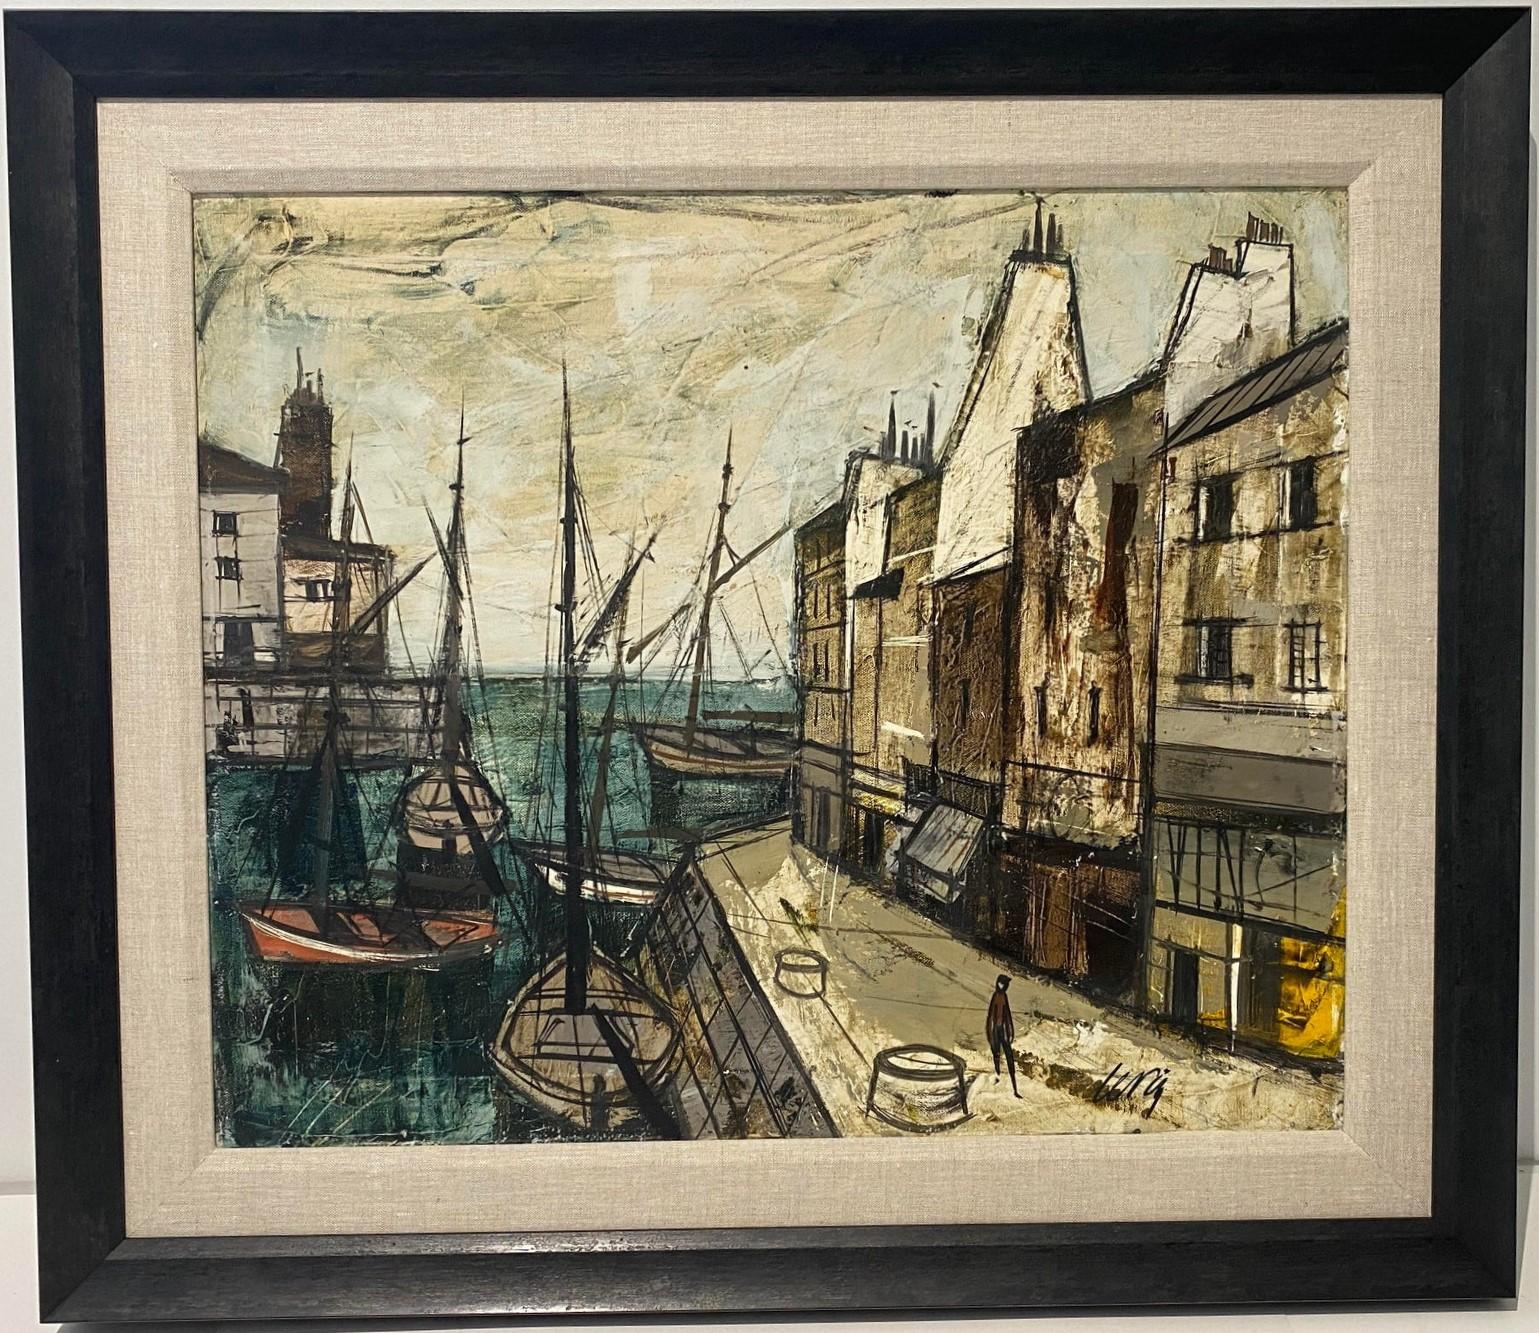 Iconic French port scene with boats and small shops., newly custom framed.

Frame size is 30